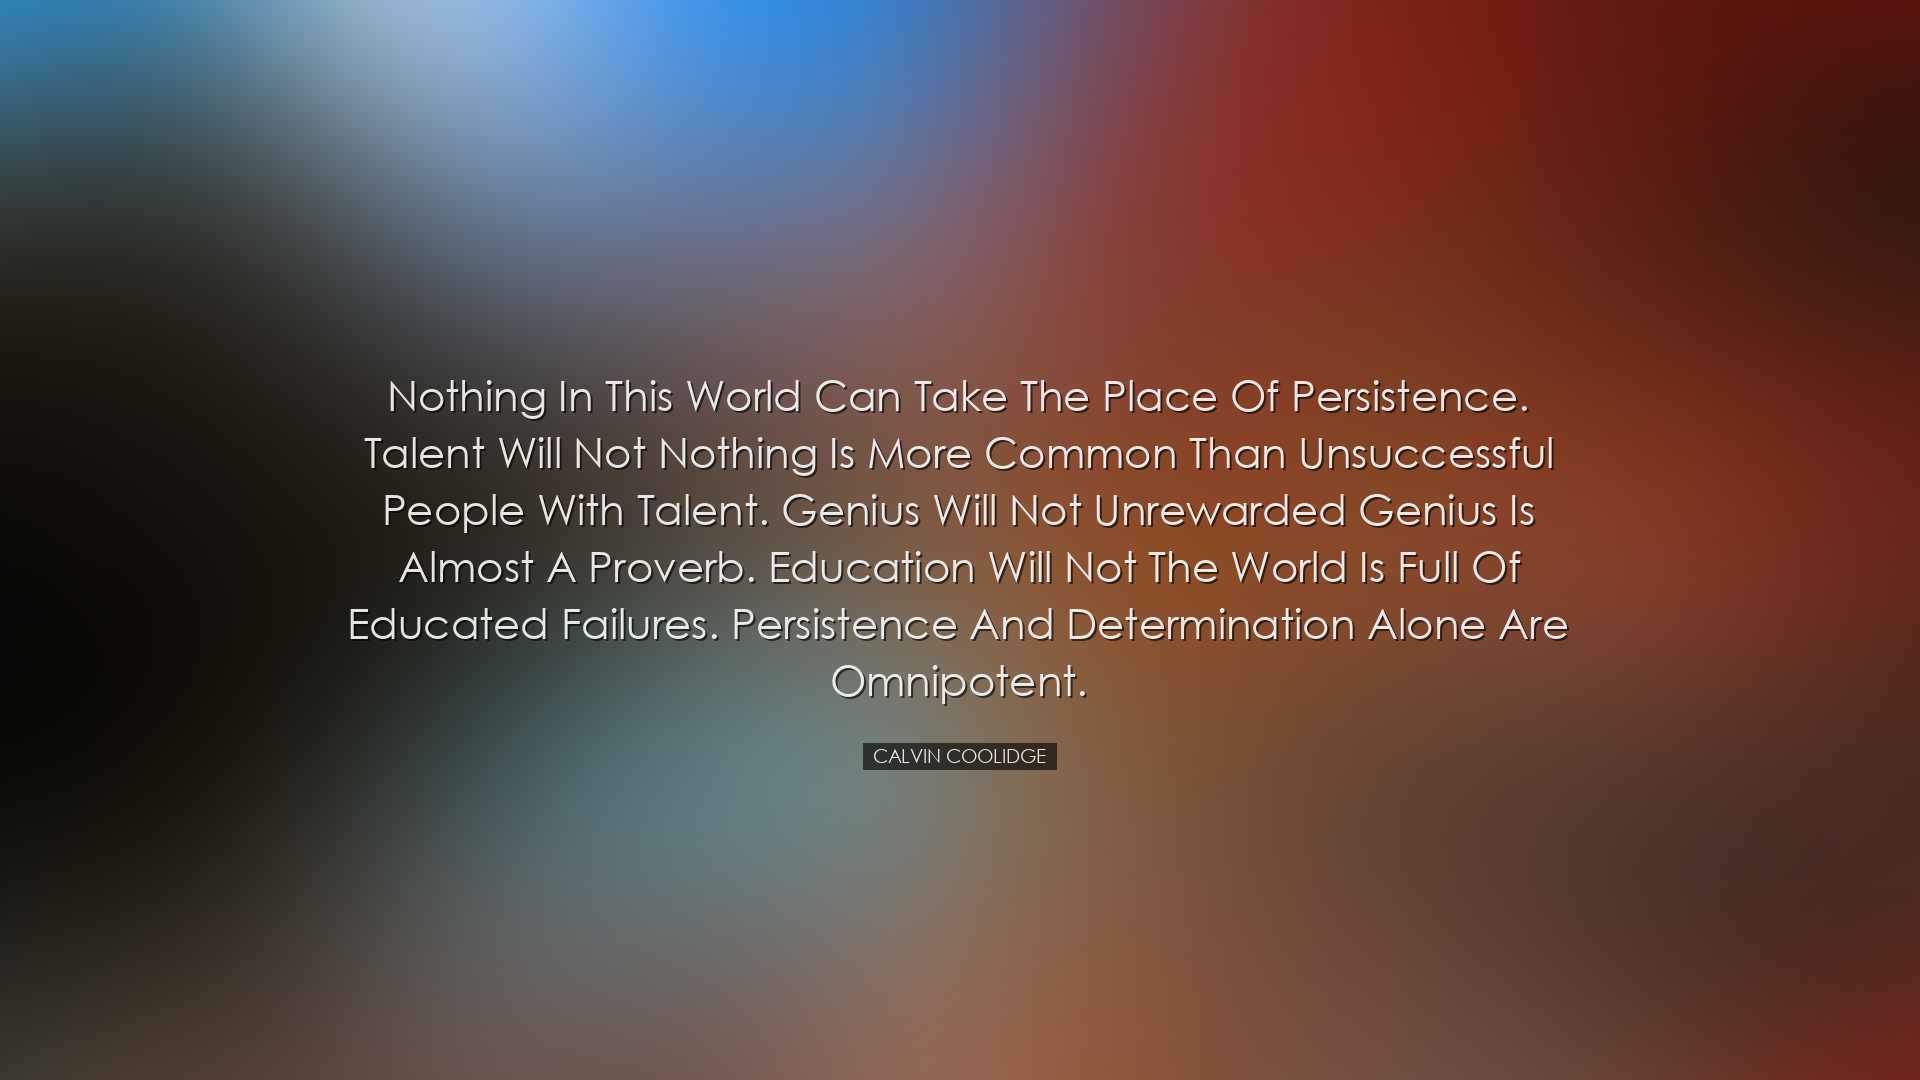 Nothing in this world can take the place of persistence. Talent wi